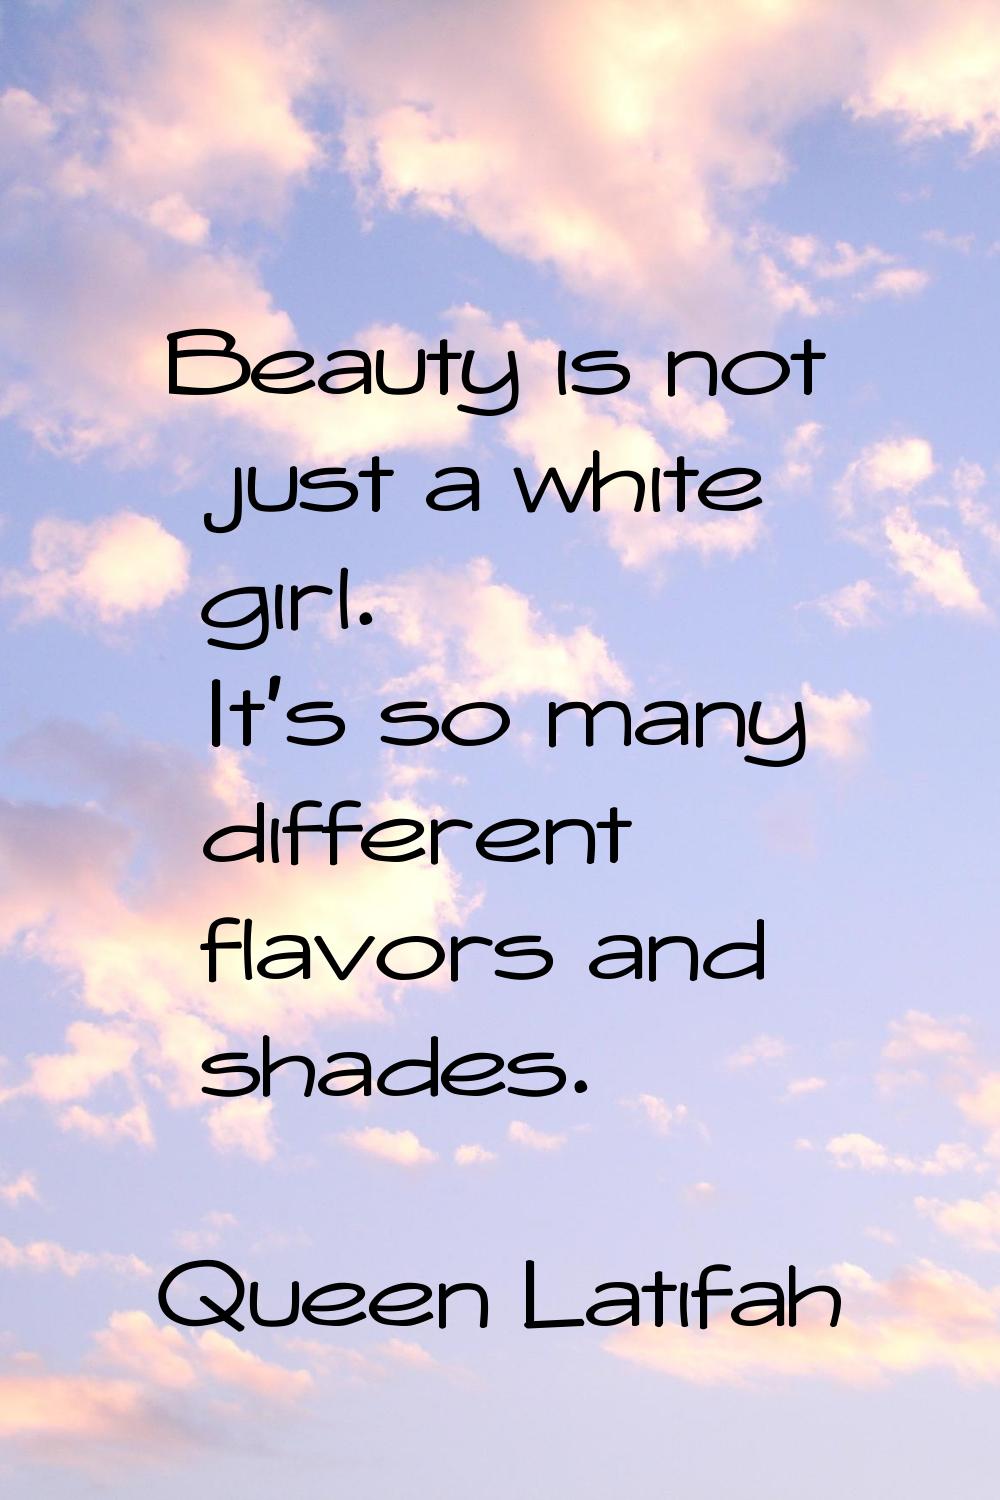 Beauty is not just a white girl. It's so many different flavors and shades.